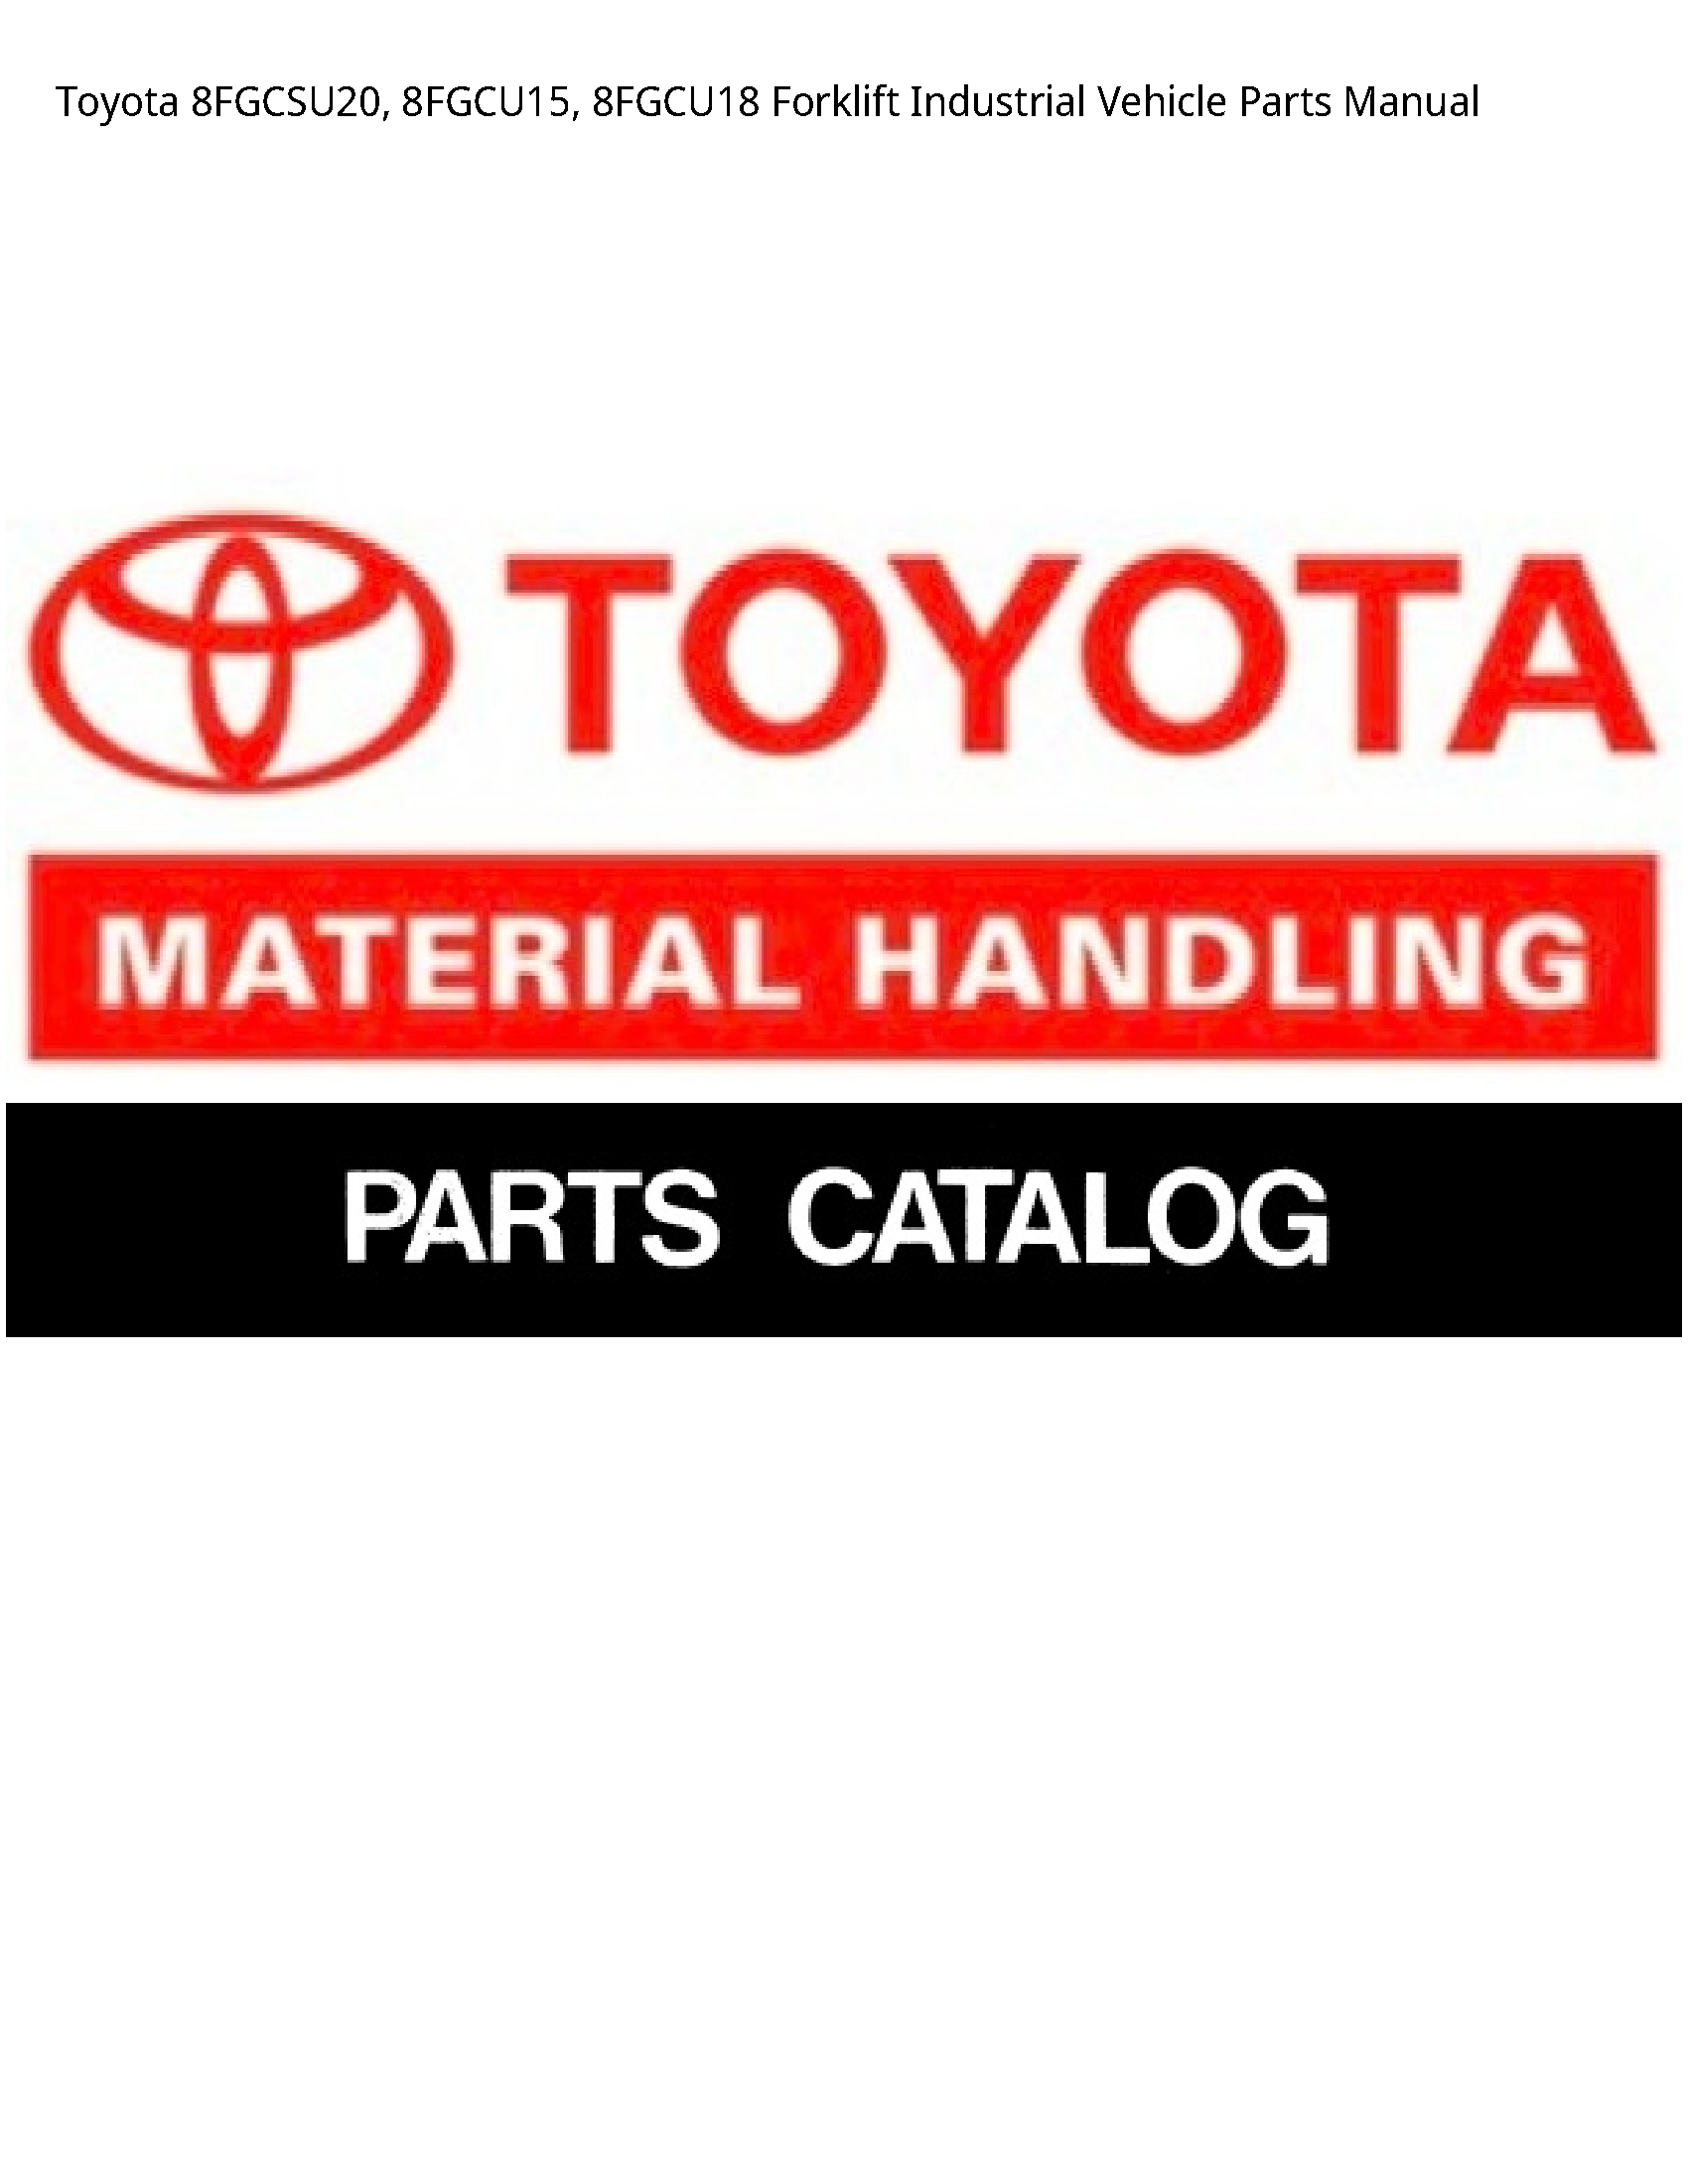 Toyota 8FGCSU20 Forklift Industrial Vehicle Parts manual